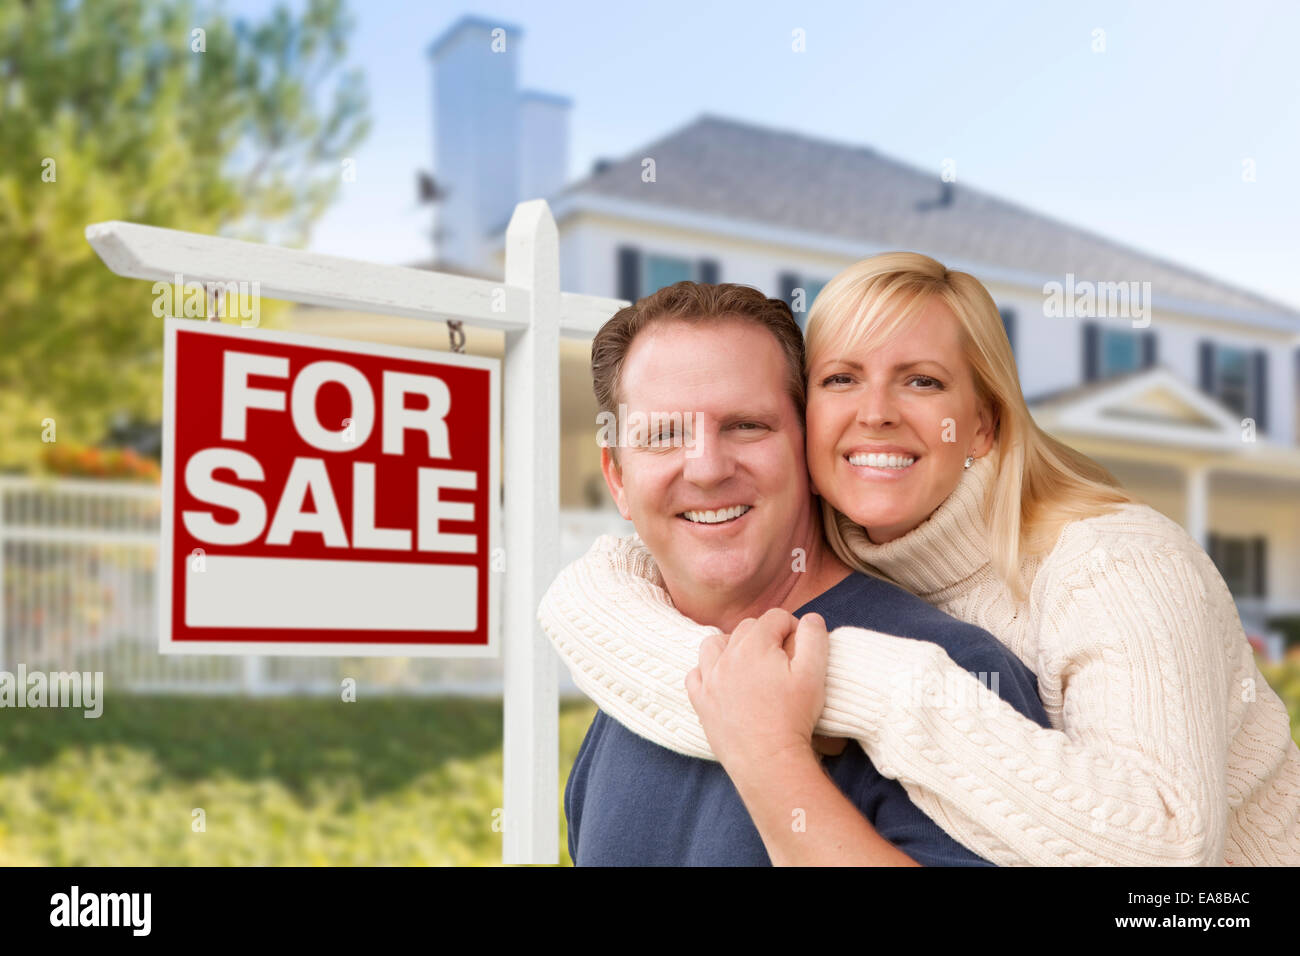 Affectionate Happy Couple in Front of New House and For Sale Real Estate Sign. Stock Photo